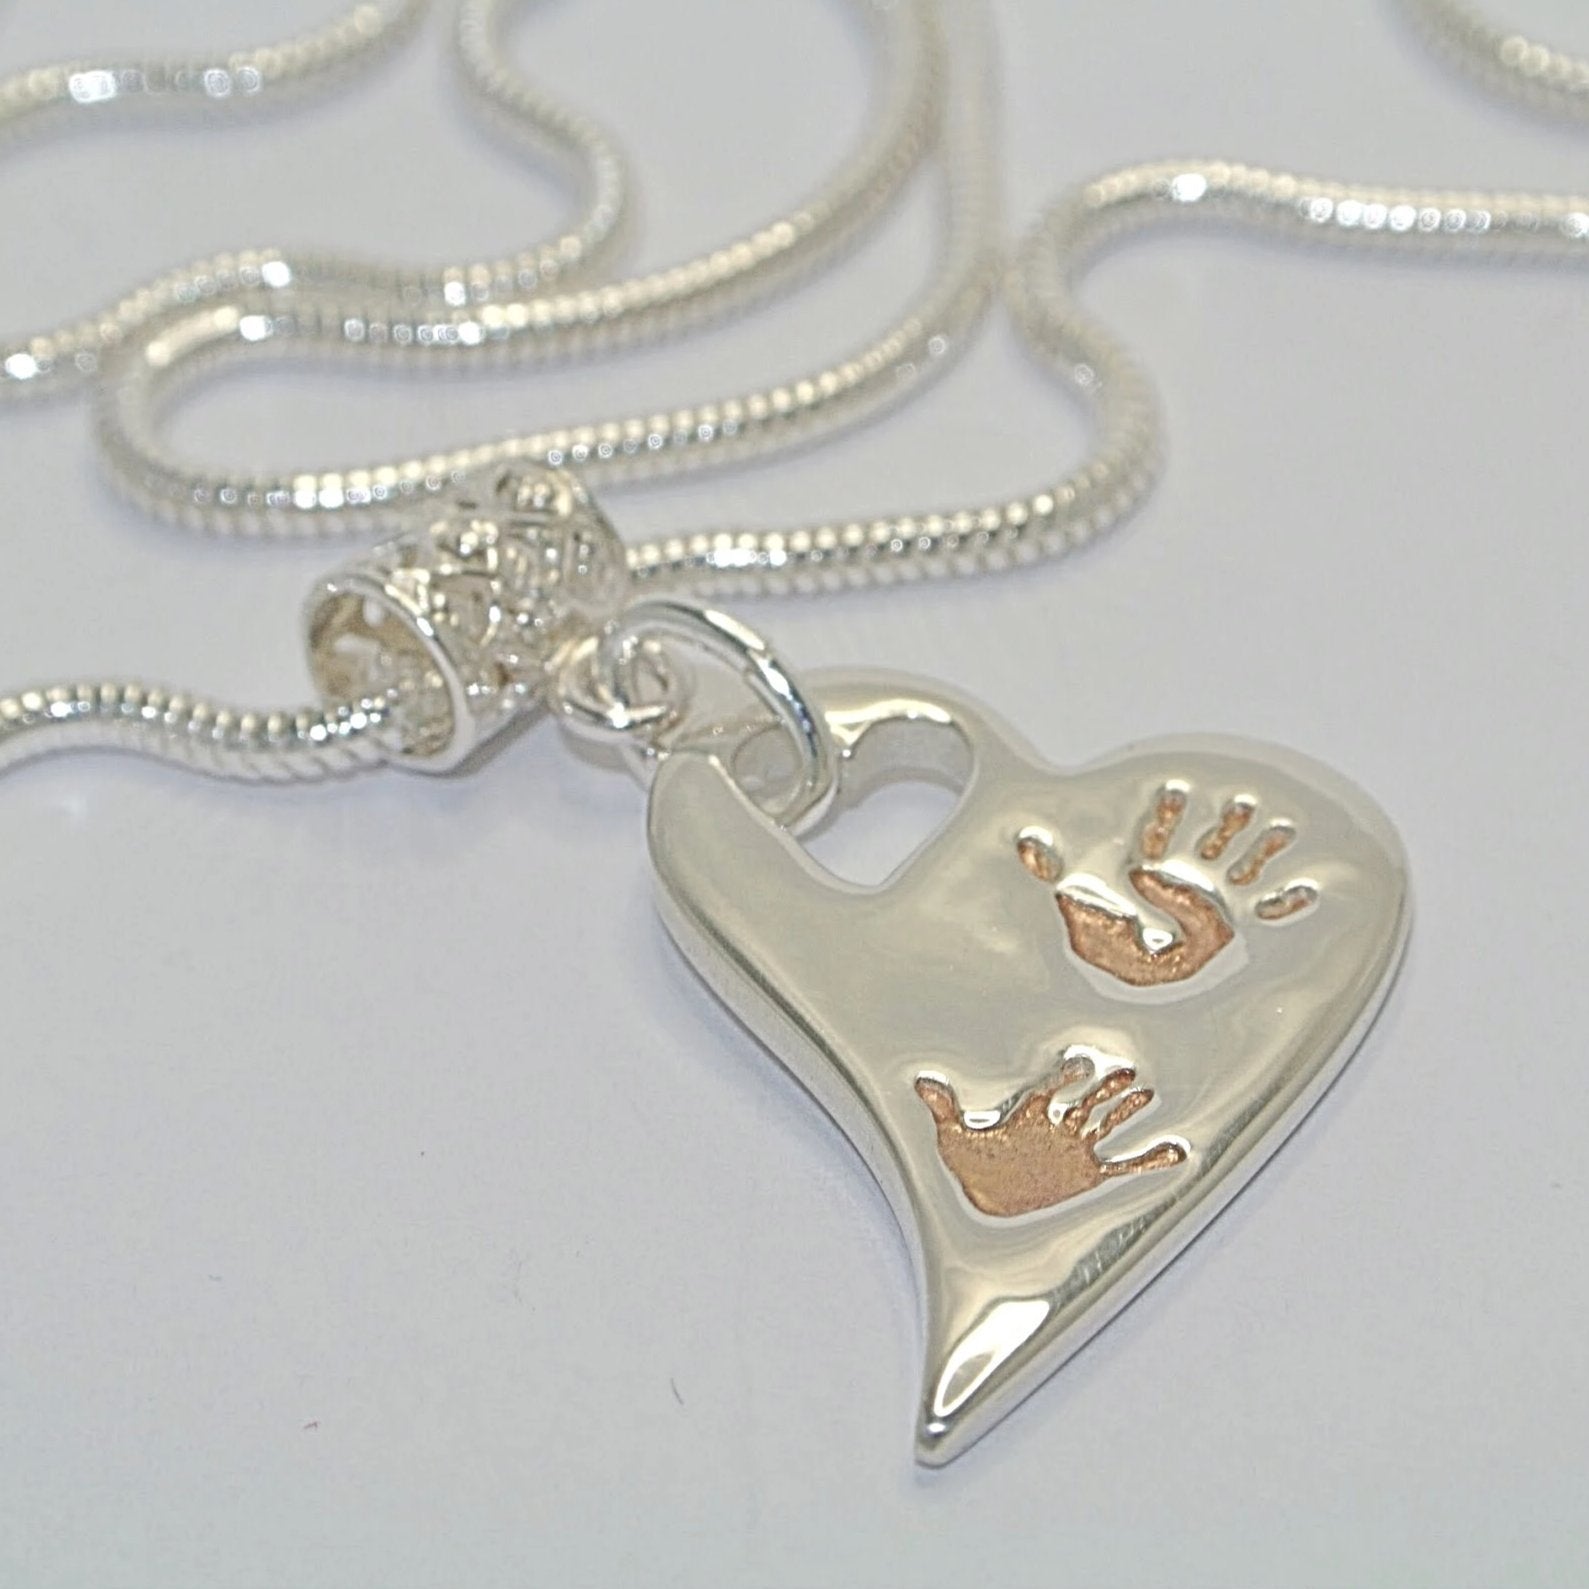 Handprint Jewellery Necklace with Rose Gold